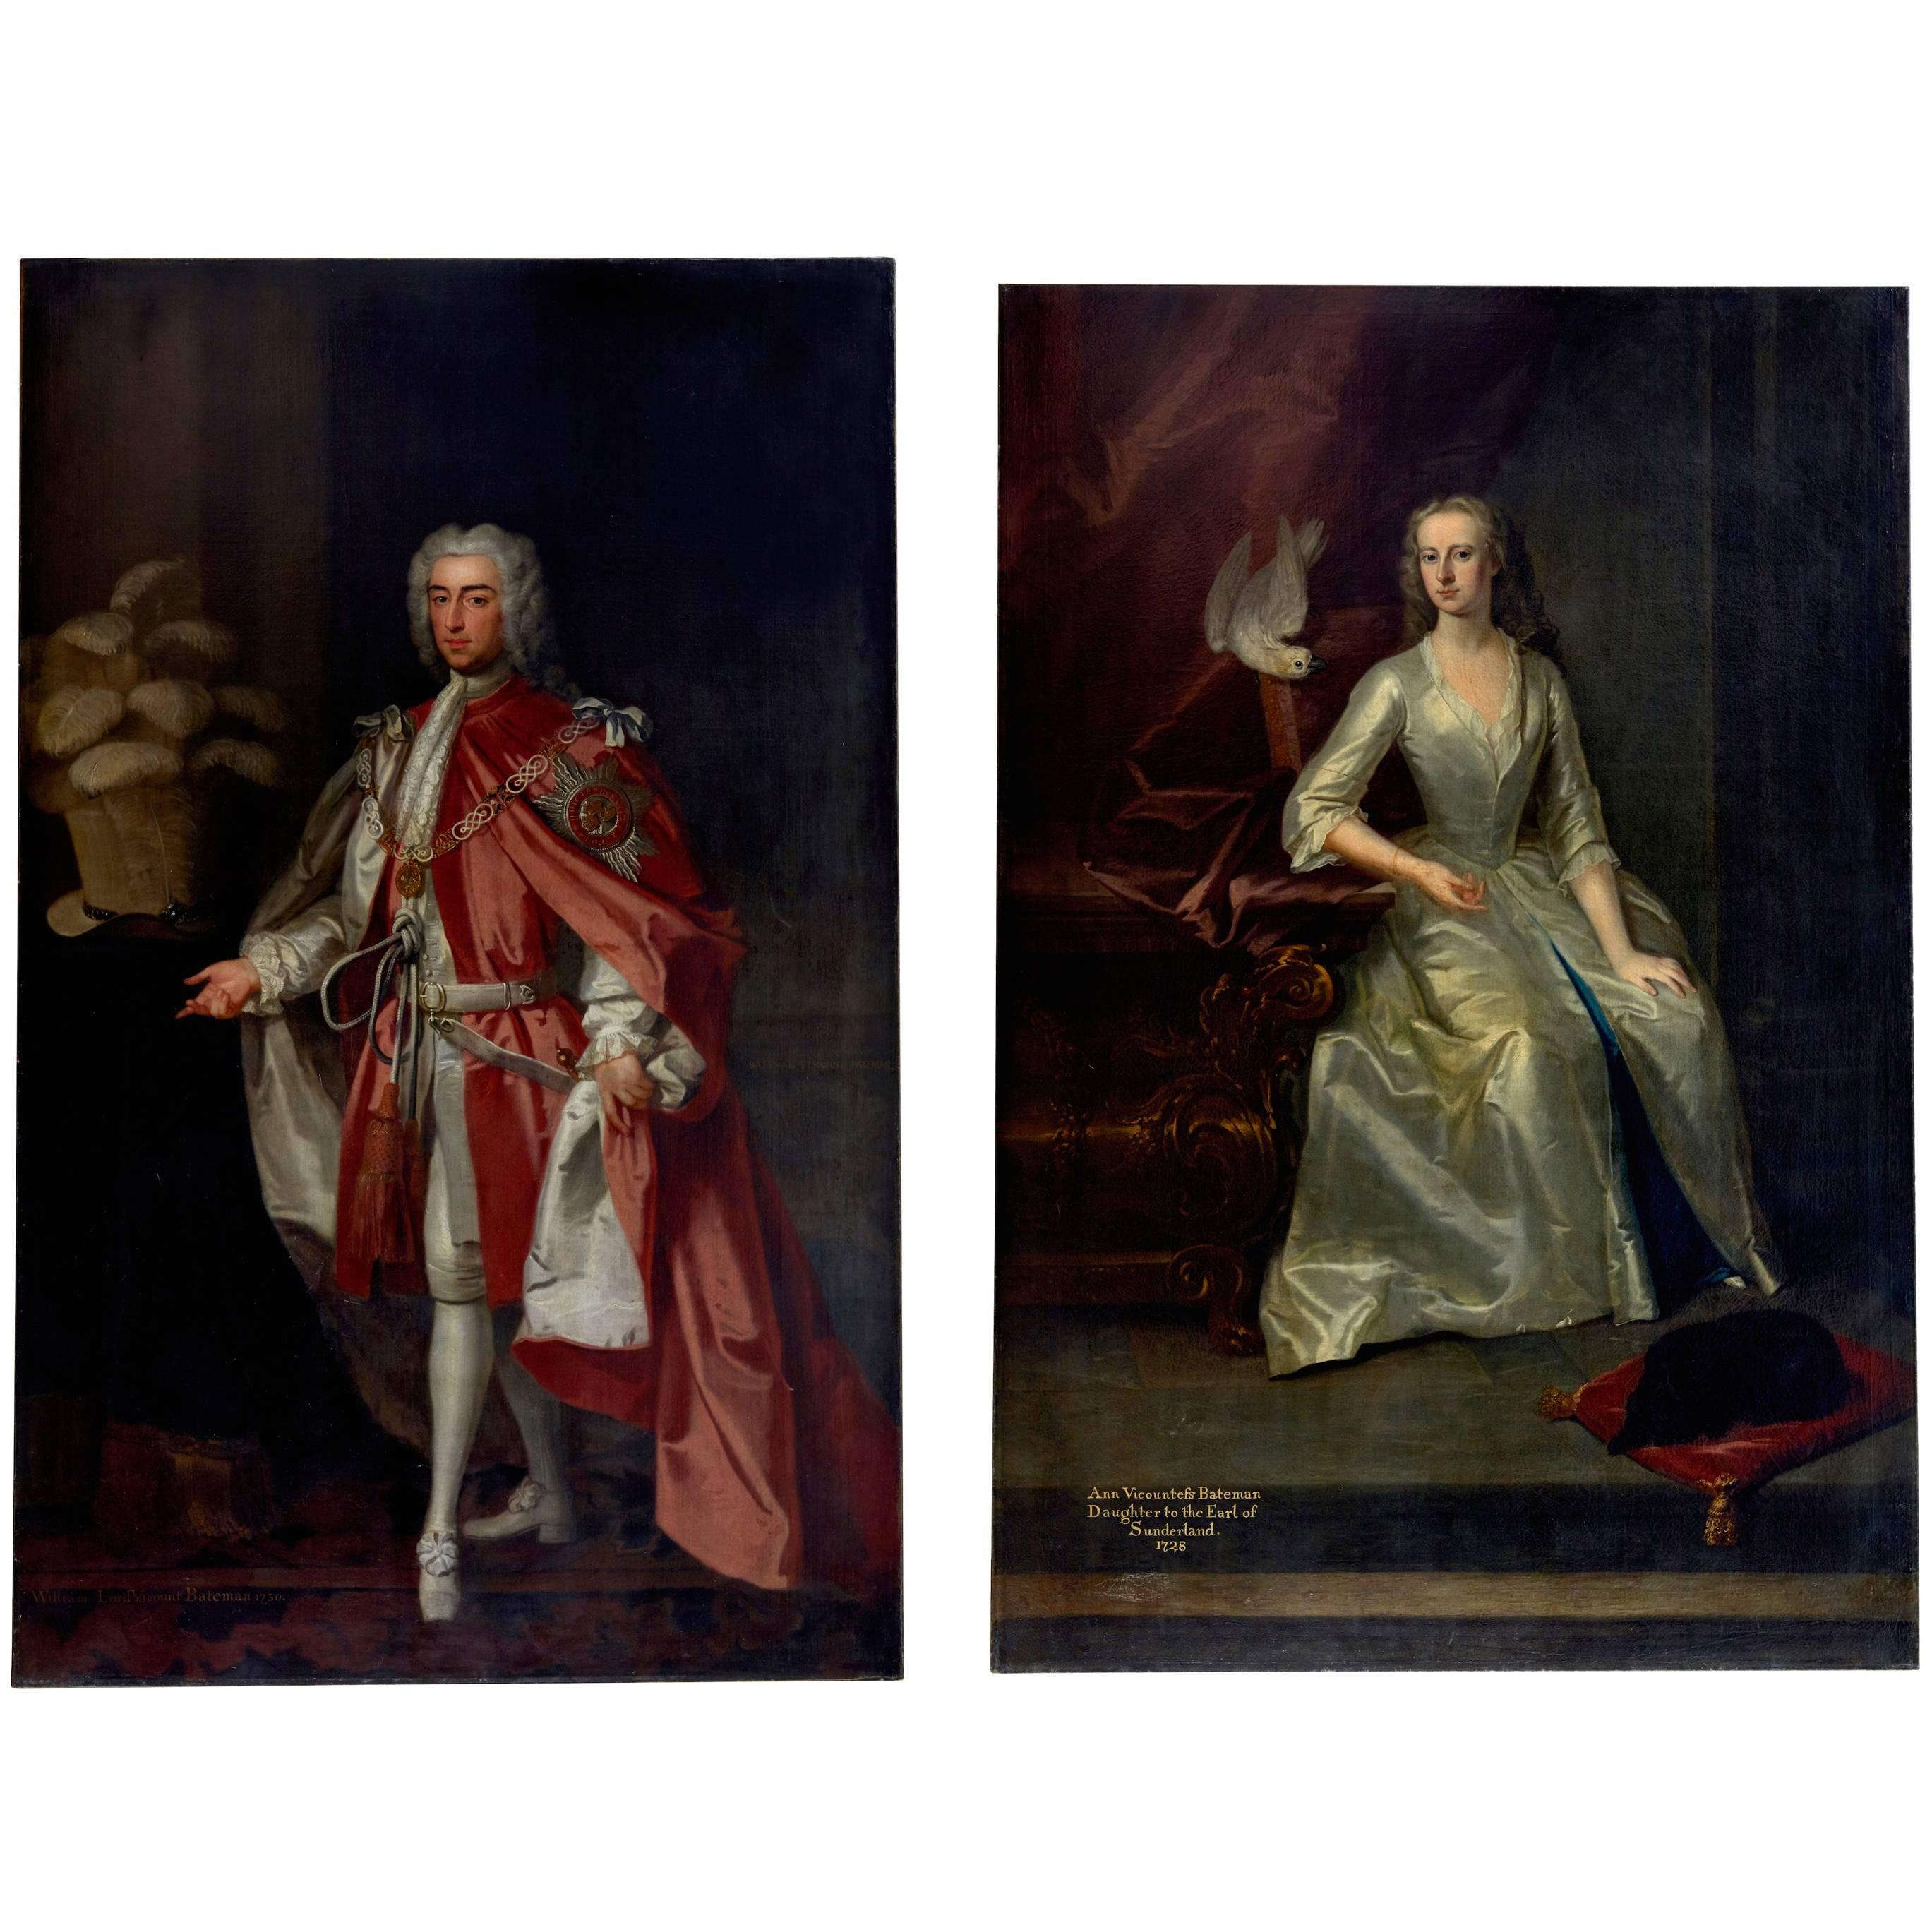 Magnificent Companion Pair of 18th Century Life-Size Portraits by Enoch Seeman